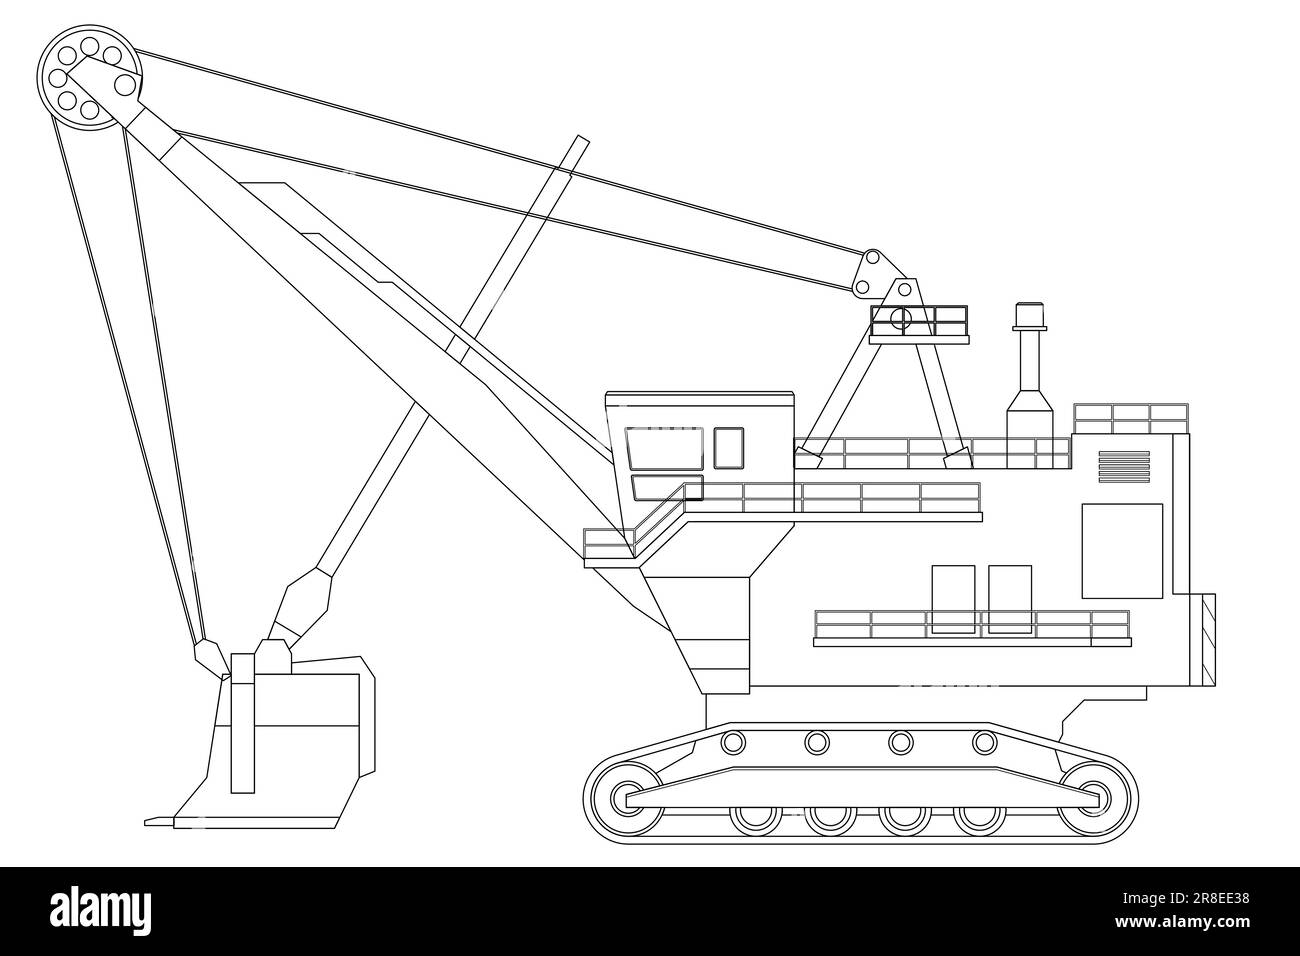 A dragline excavator, heavy equipment. Equipment for high-mining industry. Mining clay in quarry. Stock Vector